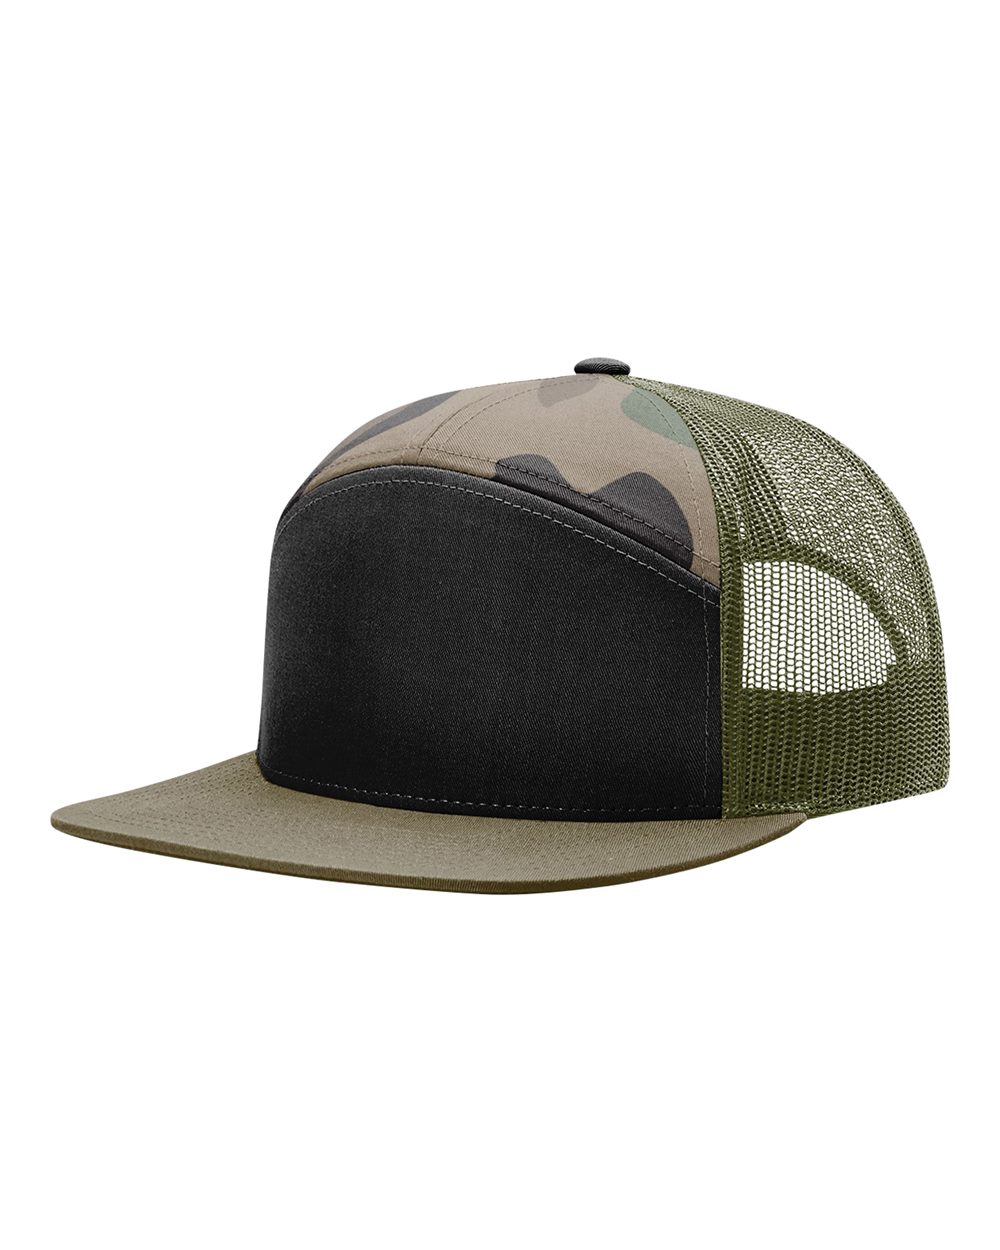 Camo Hats - The Mad Hatter Company